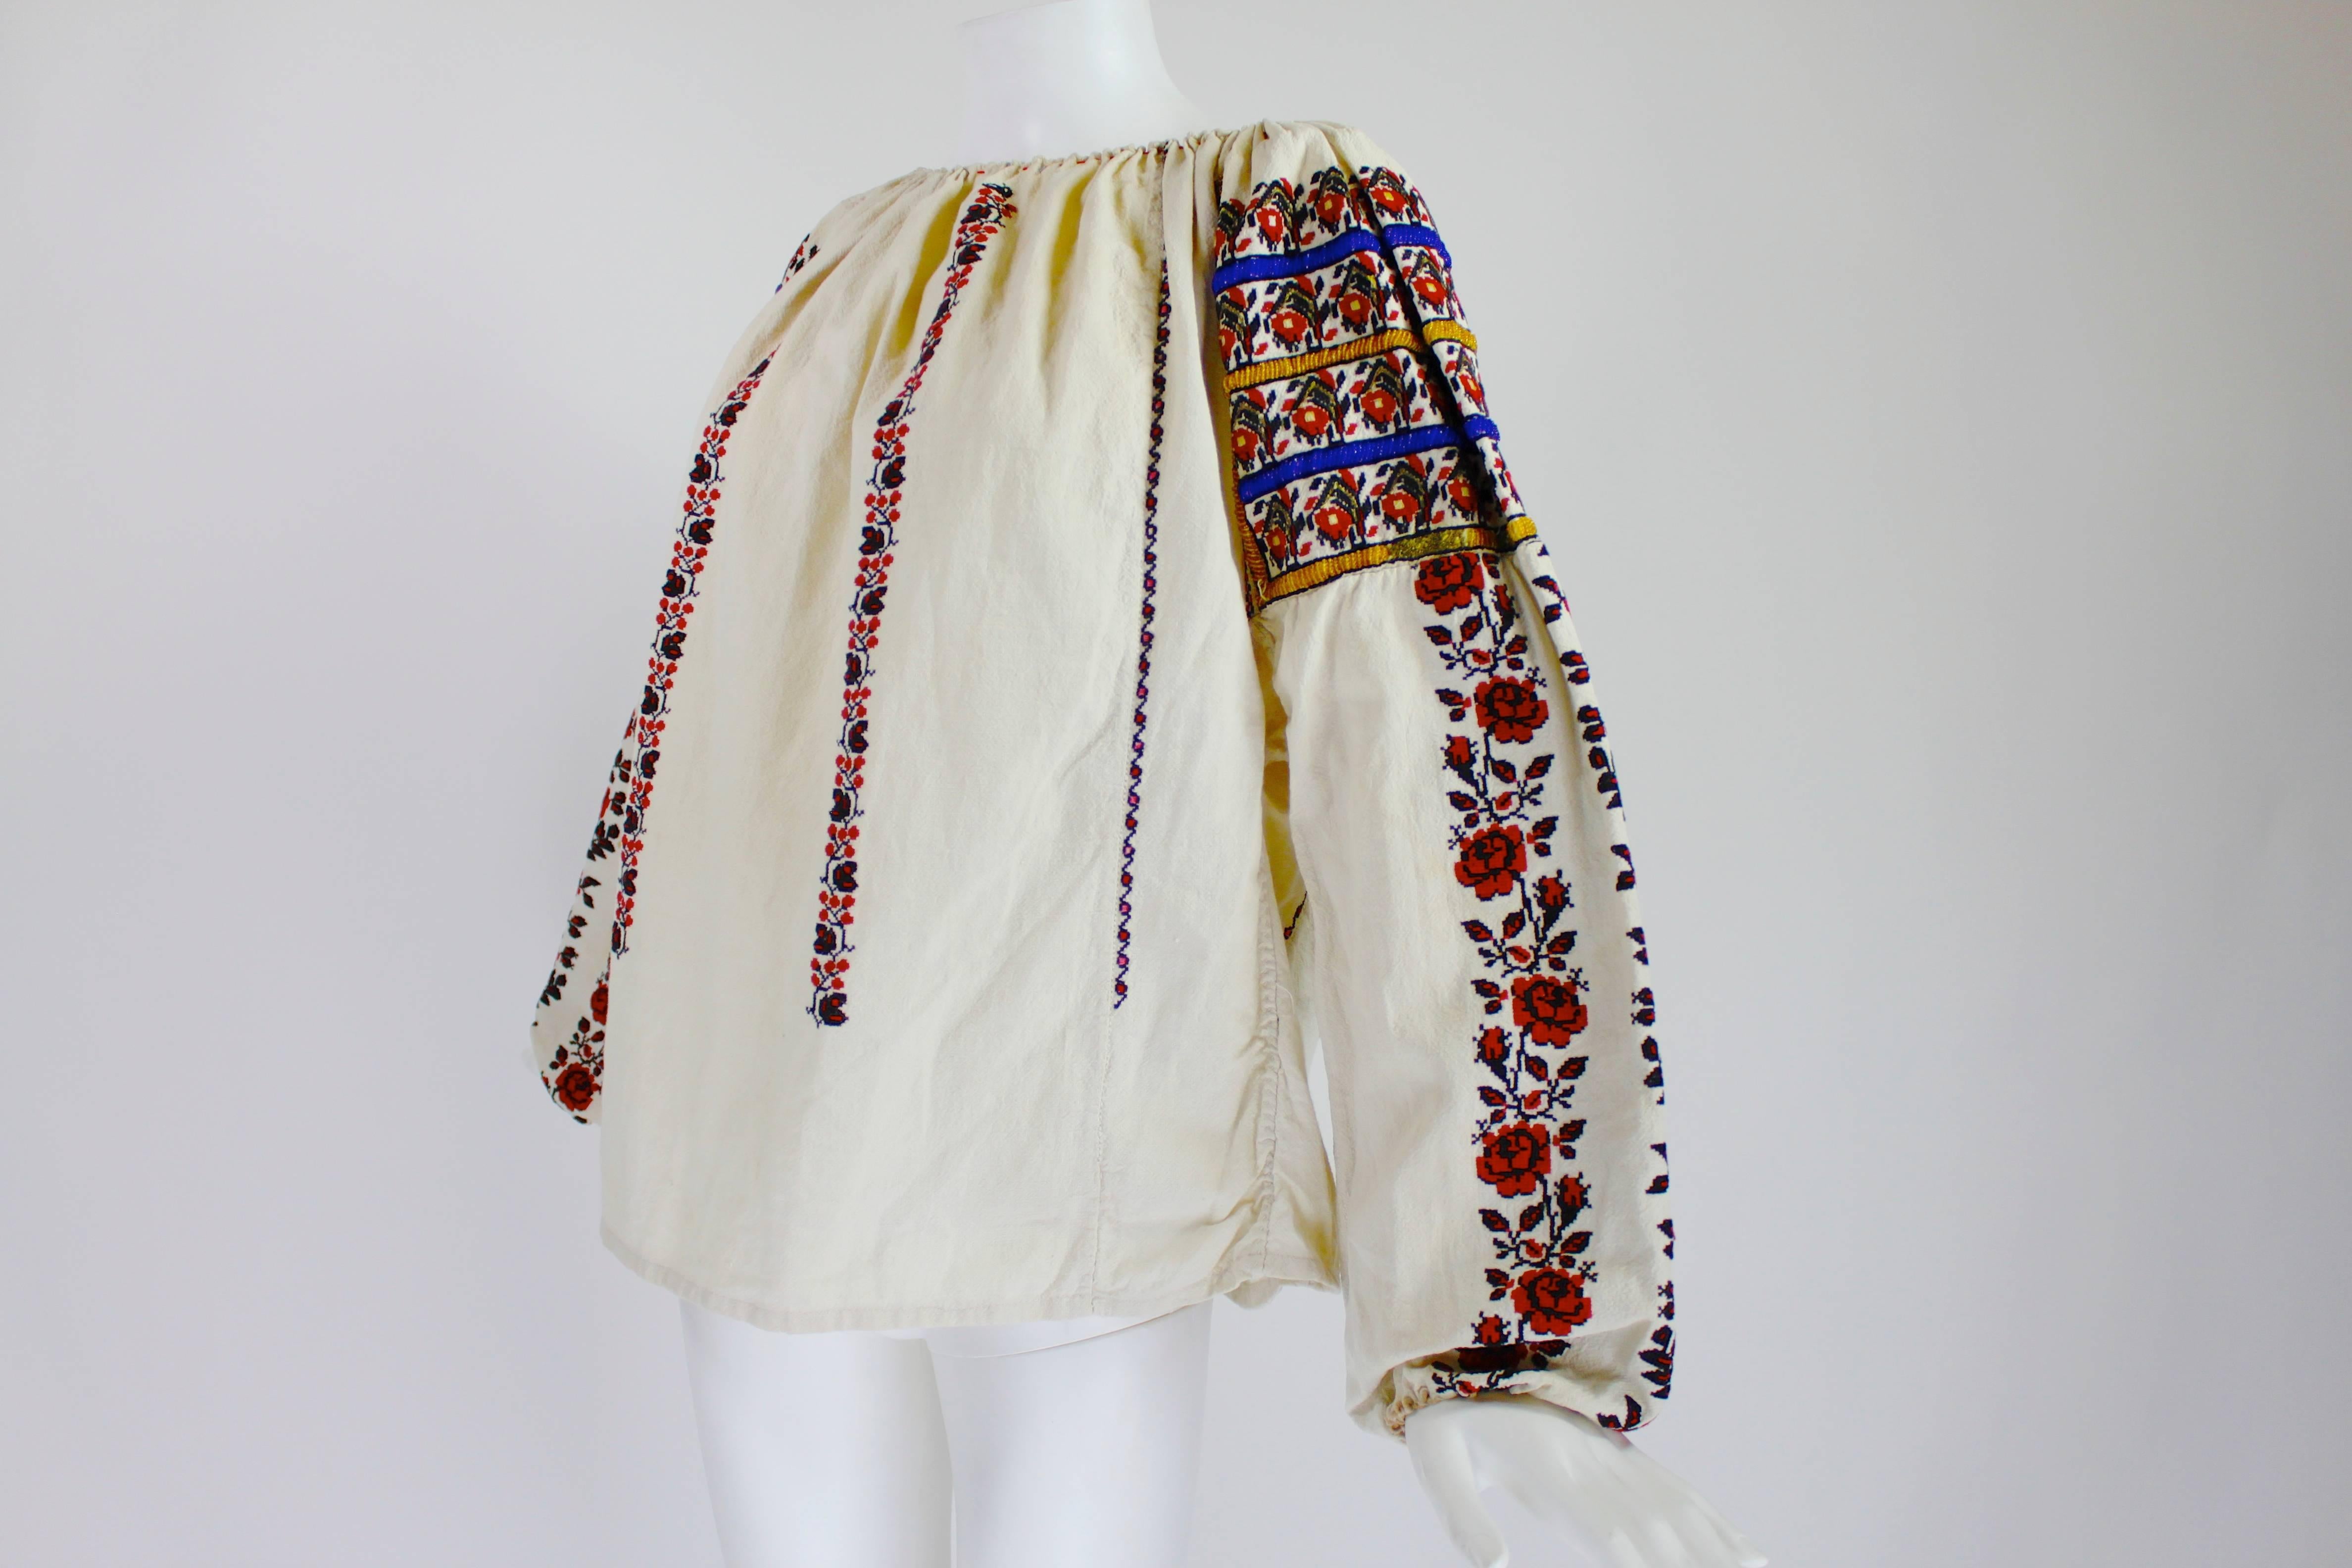 This is one of the best late 1920s/early 1930s Eastern European embroidered peasant blouses we've seen! The blouse is covered with vines of bright red rose embroidery and the shoulders are capped with alternating blue and yellow stripes of beadwork.